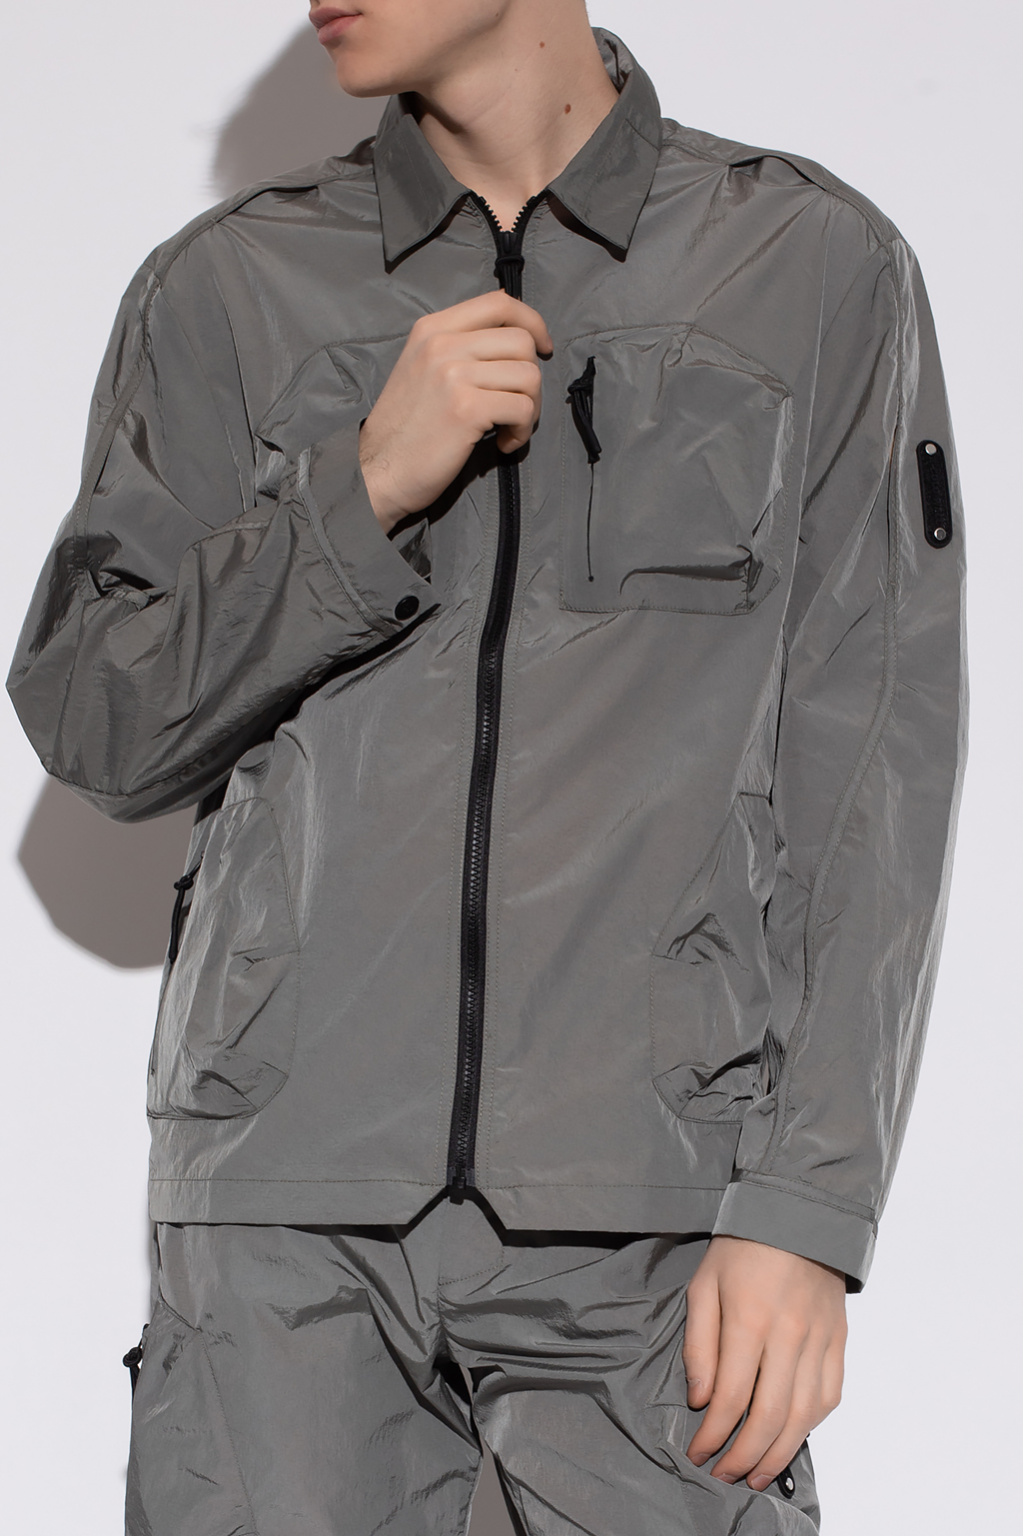 A-COLD-WALL* jacket Bands with pockets